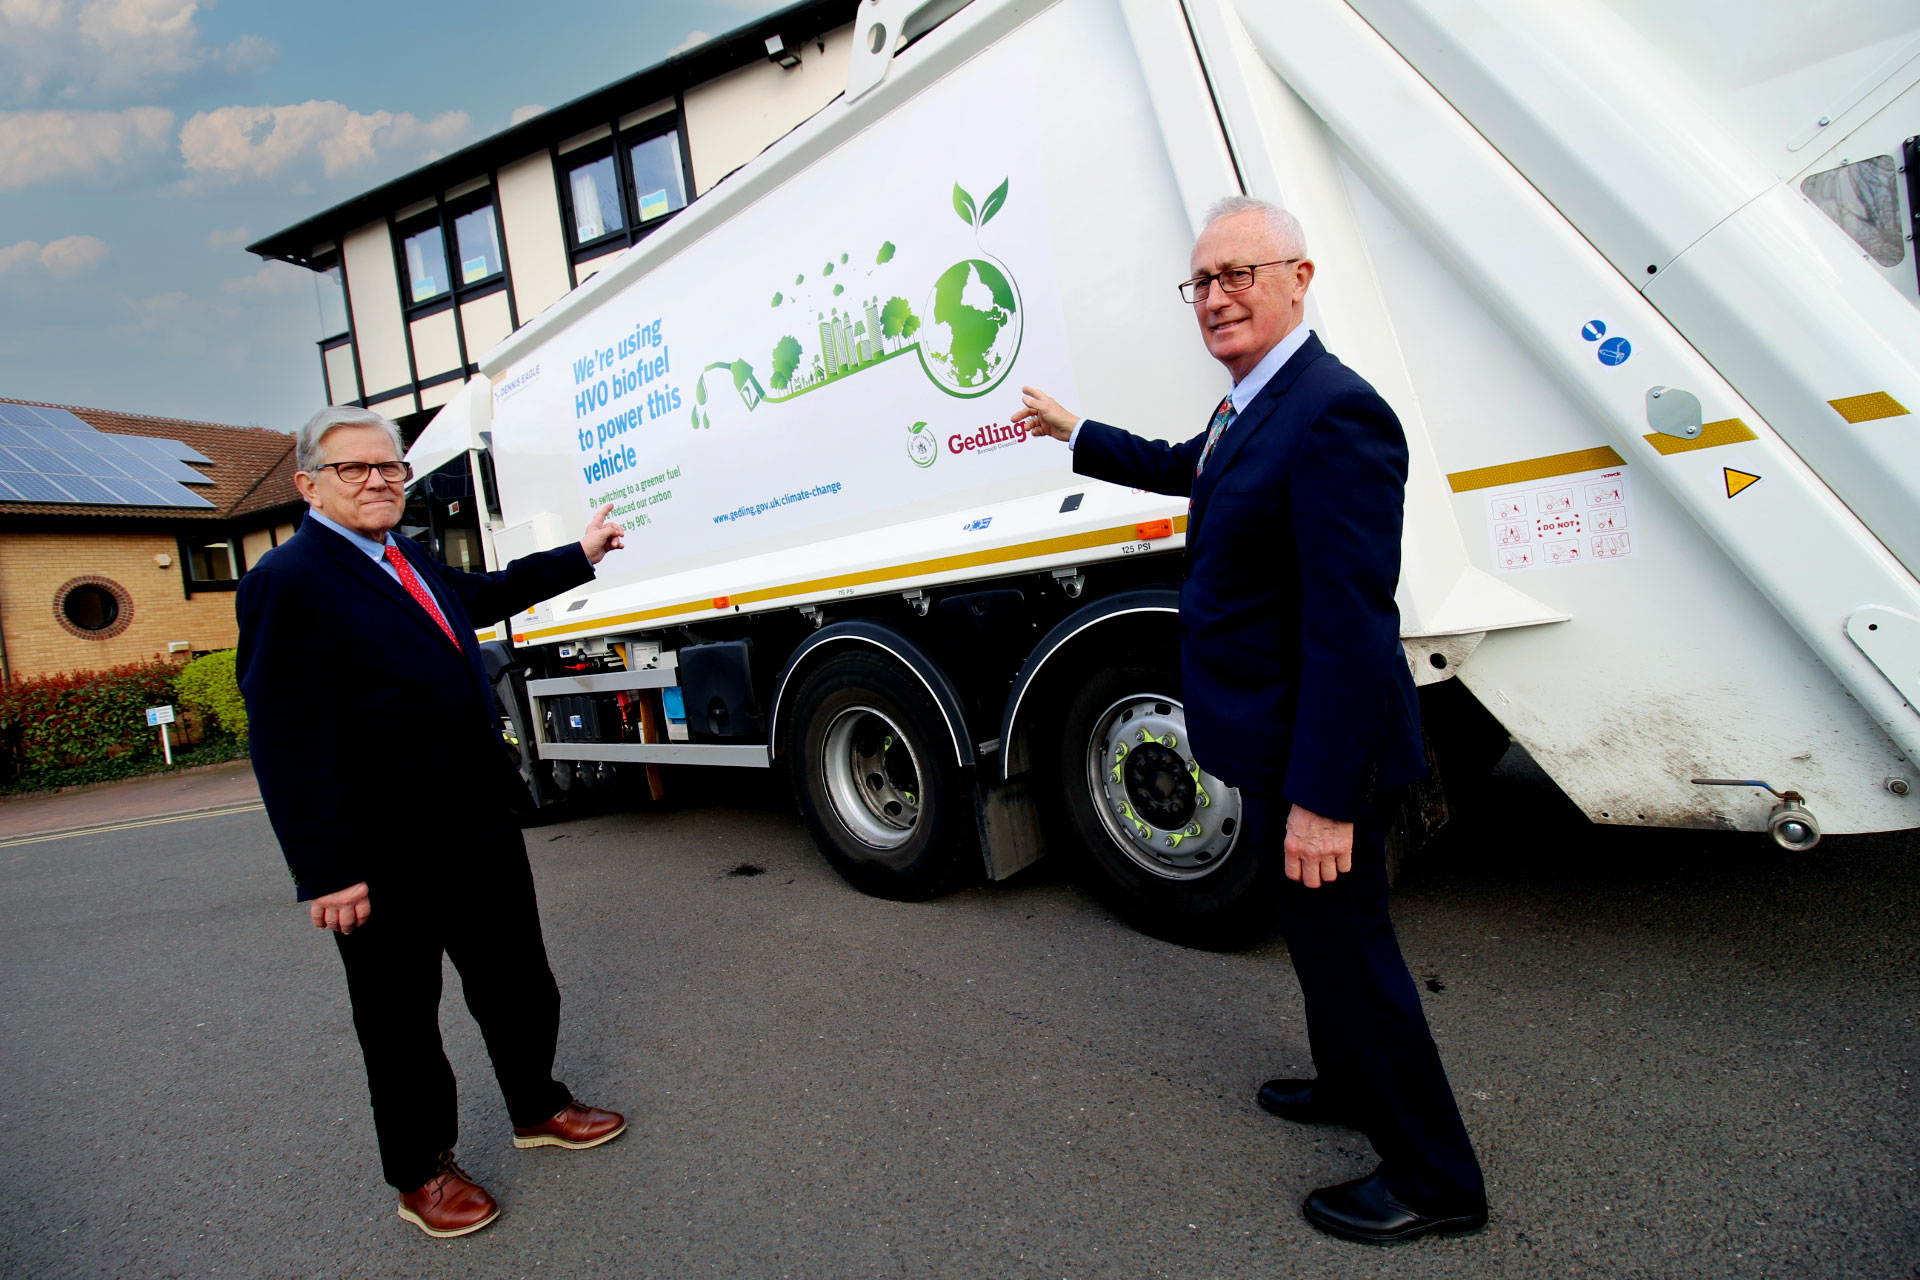 Leader and Councillor stood next to the new biofuel vehicle